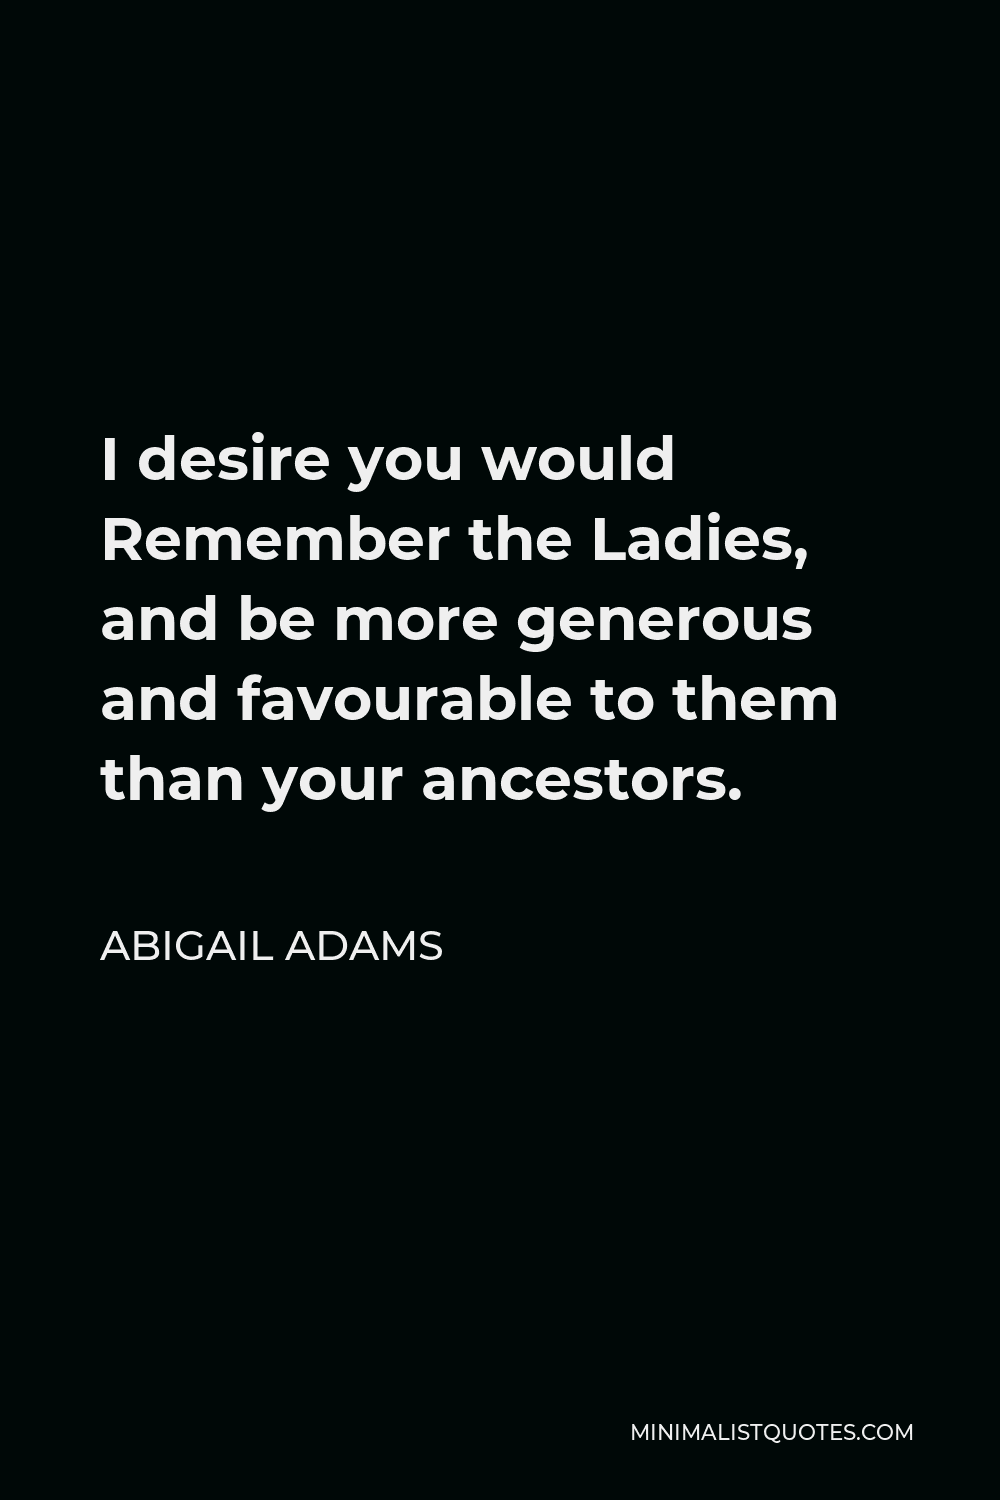 Abigail Adams Quote - I desire you would Remember the Ladies, and be more generous and favourable to them than your ancestors.